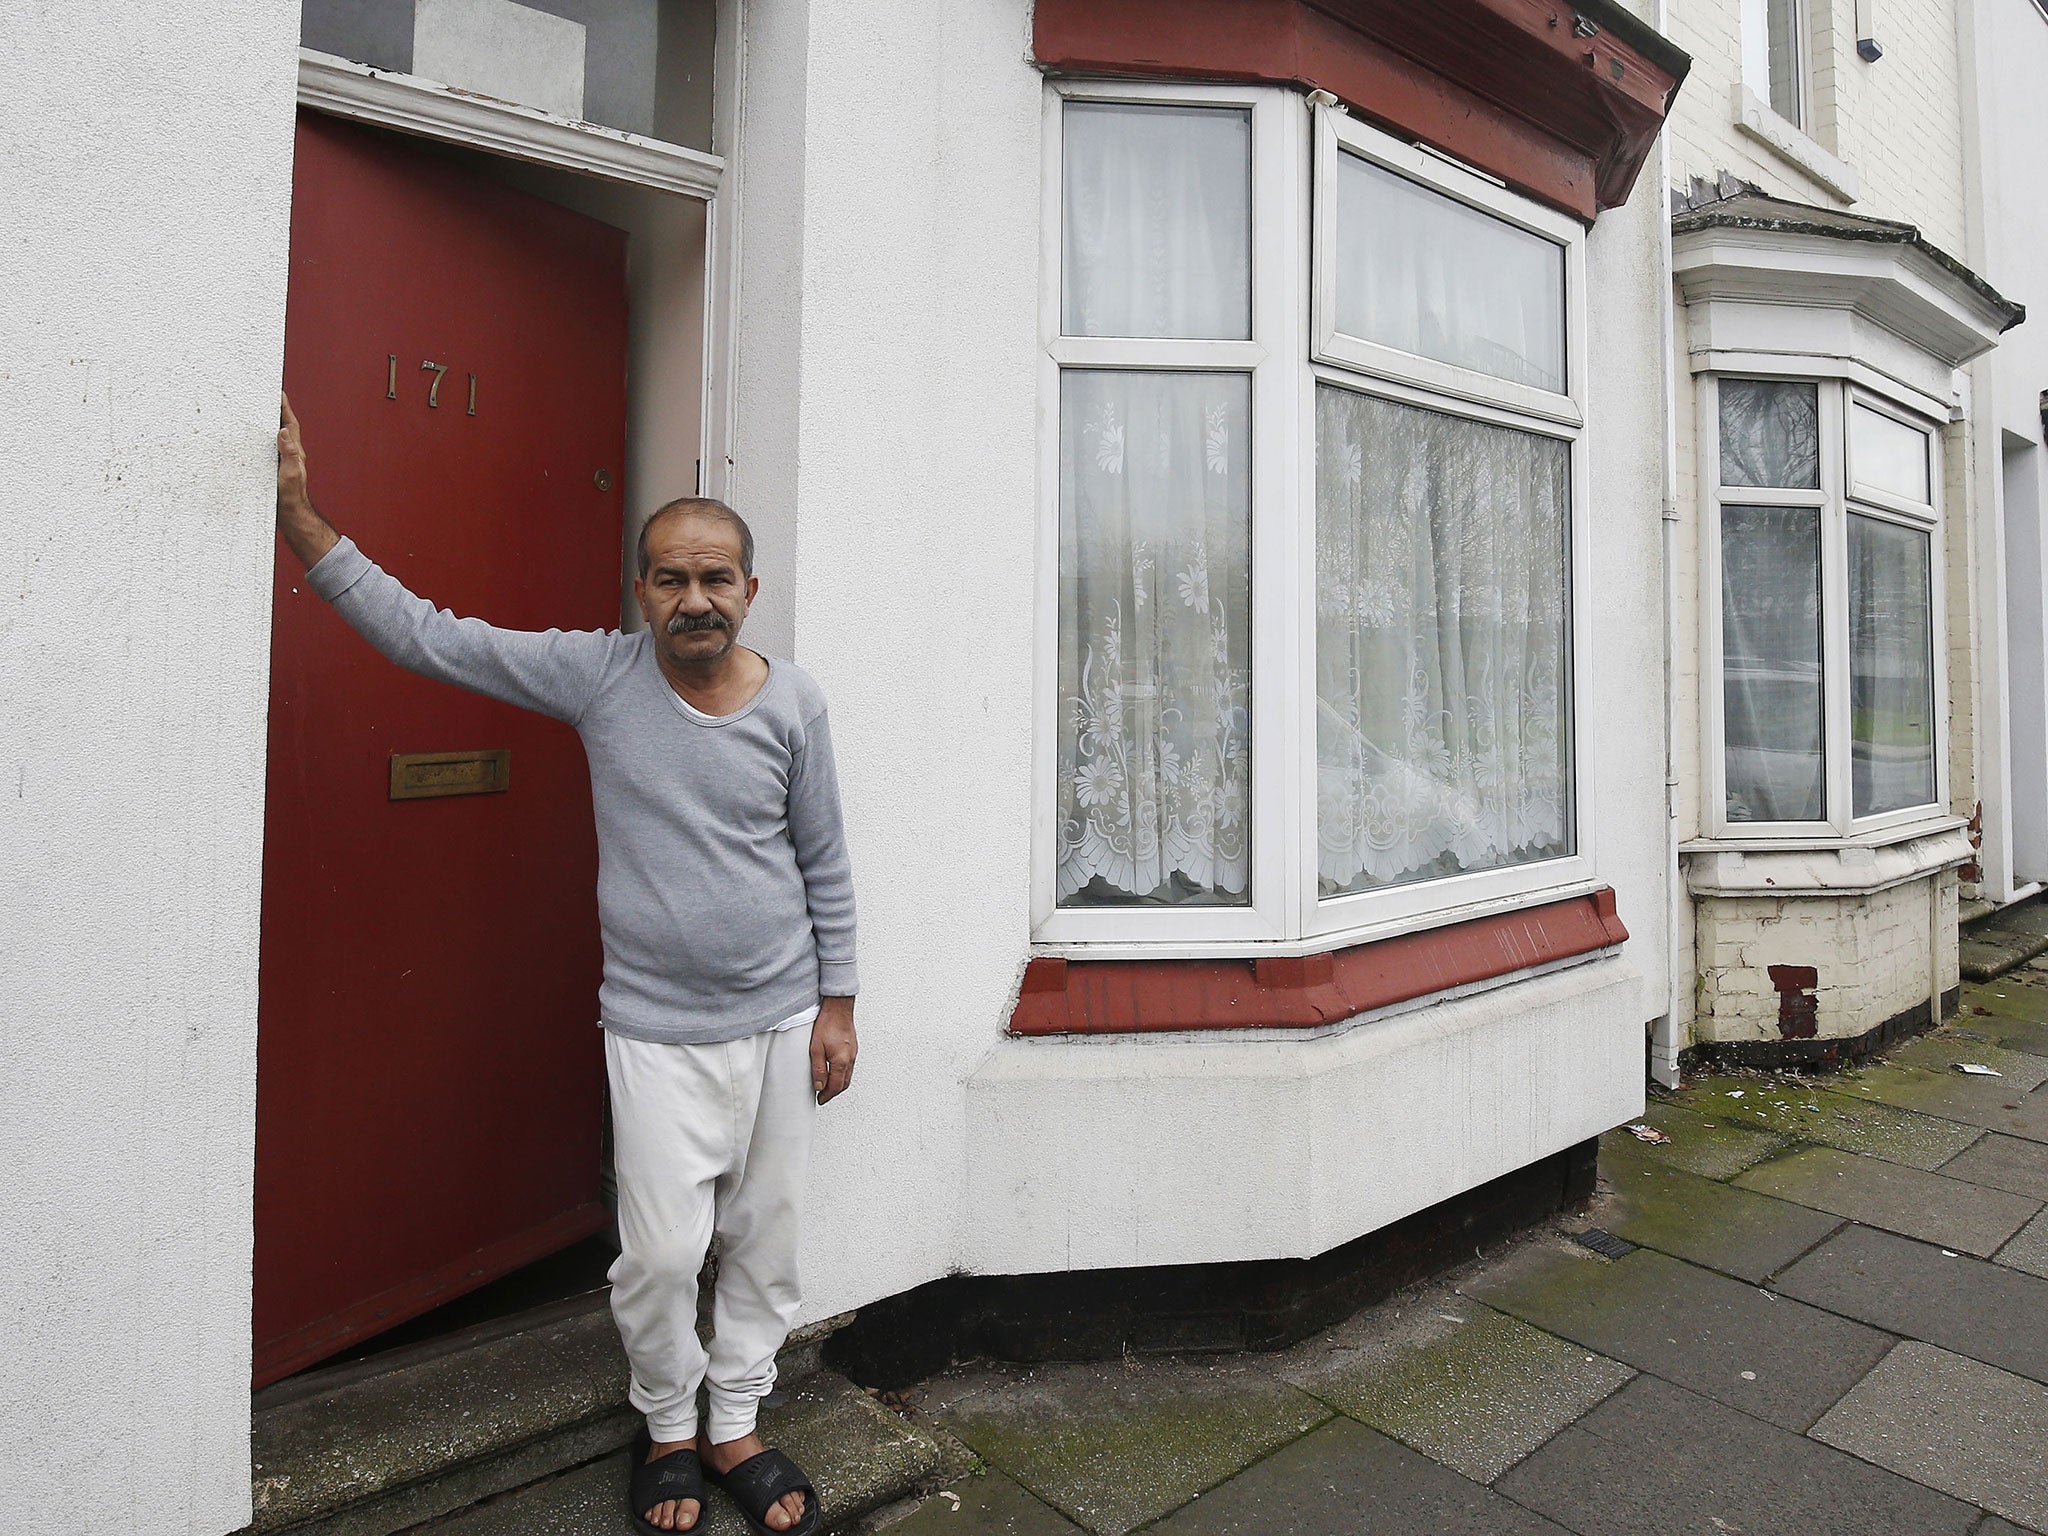 Mr Bayzavi's front door was painted red by Jomast, a subcontractor of services giant G4S